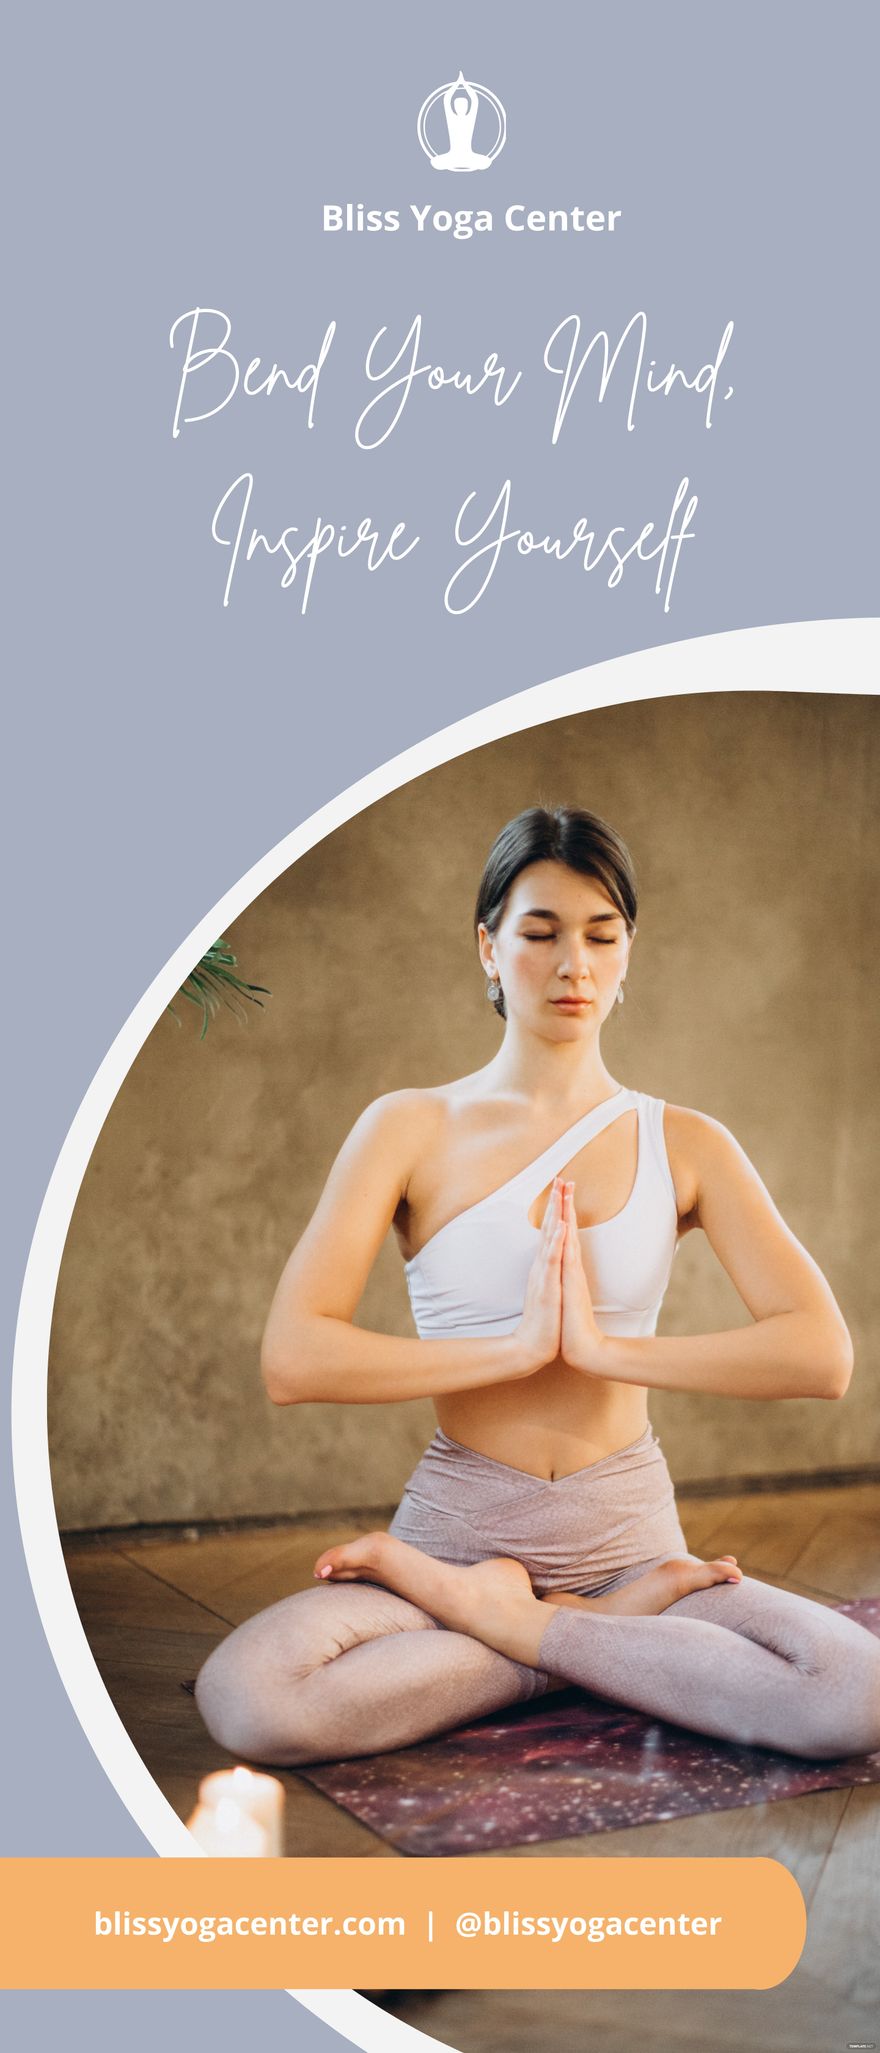 Free Yoga Center Roll-Up Banner Template